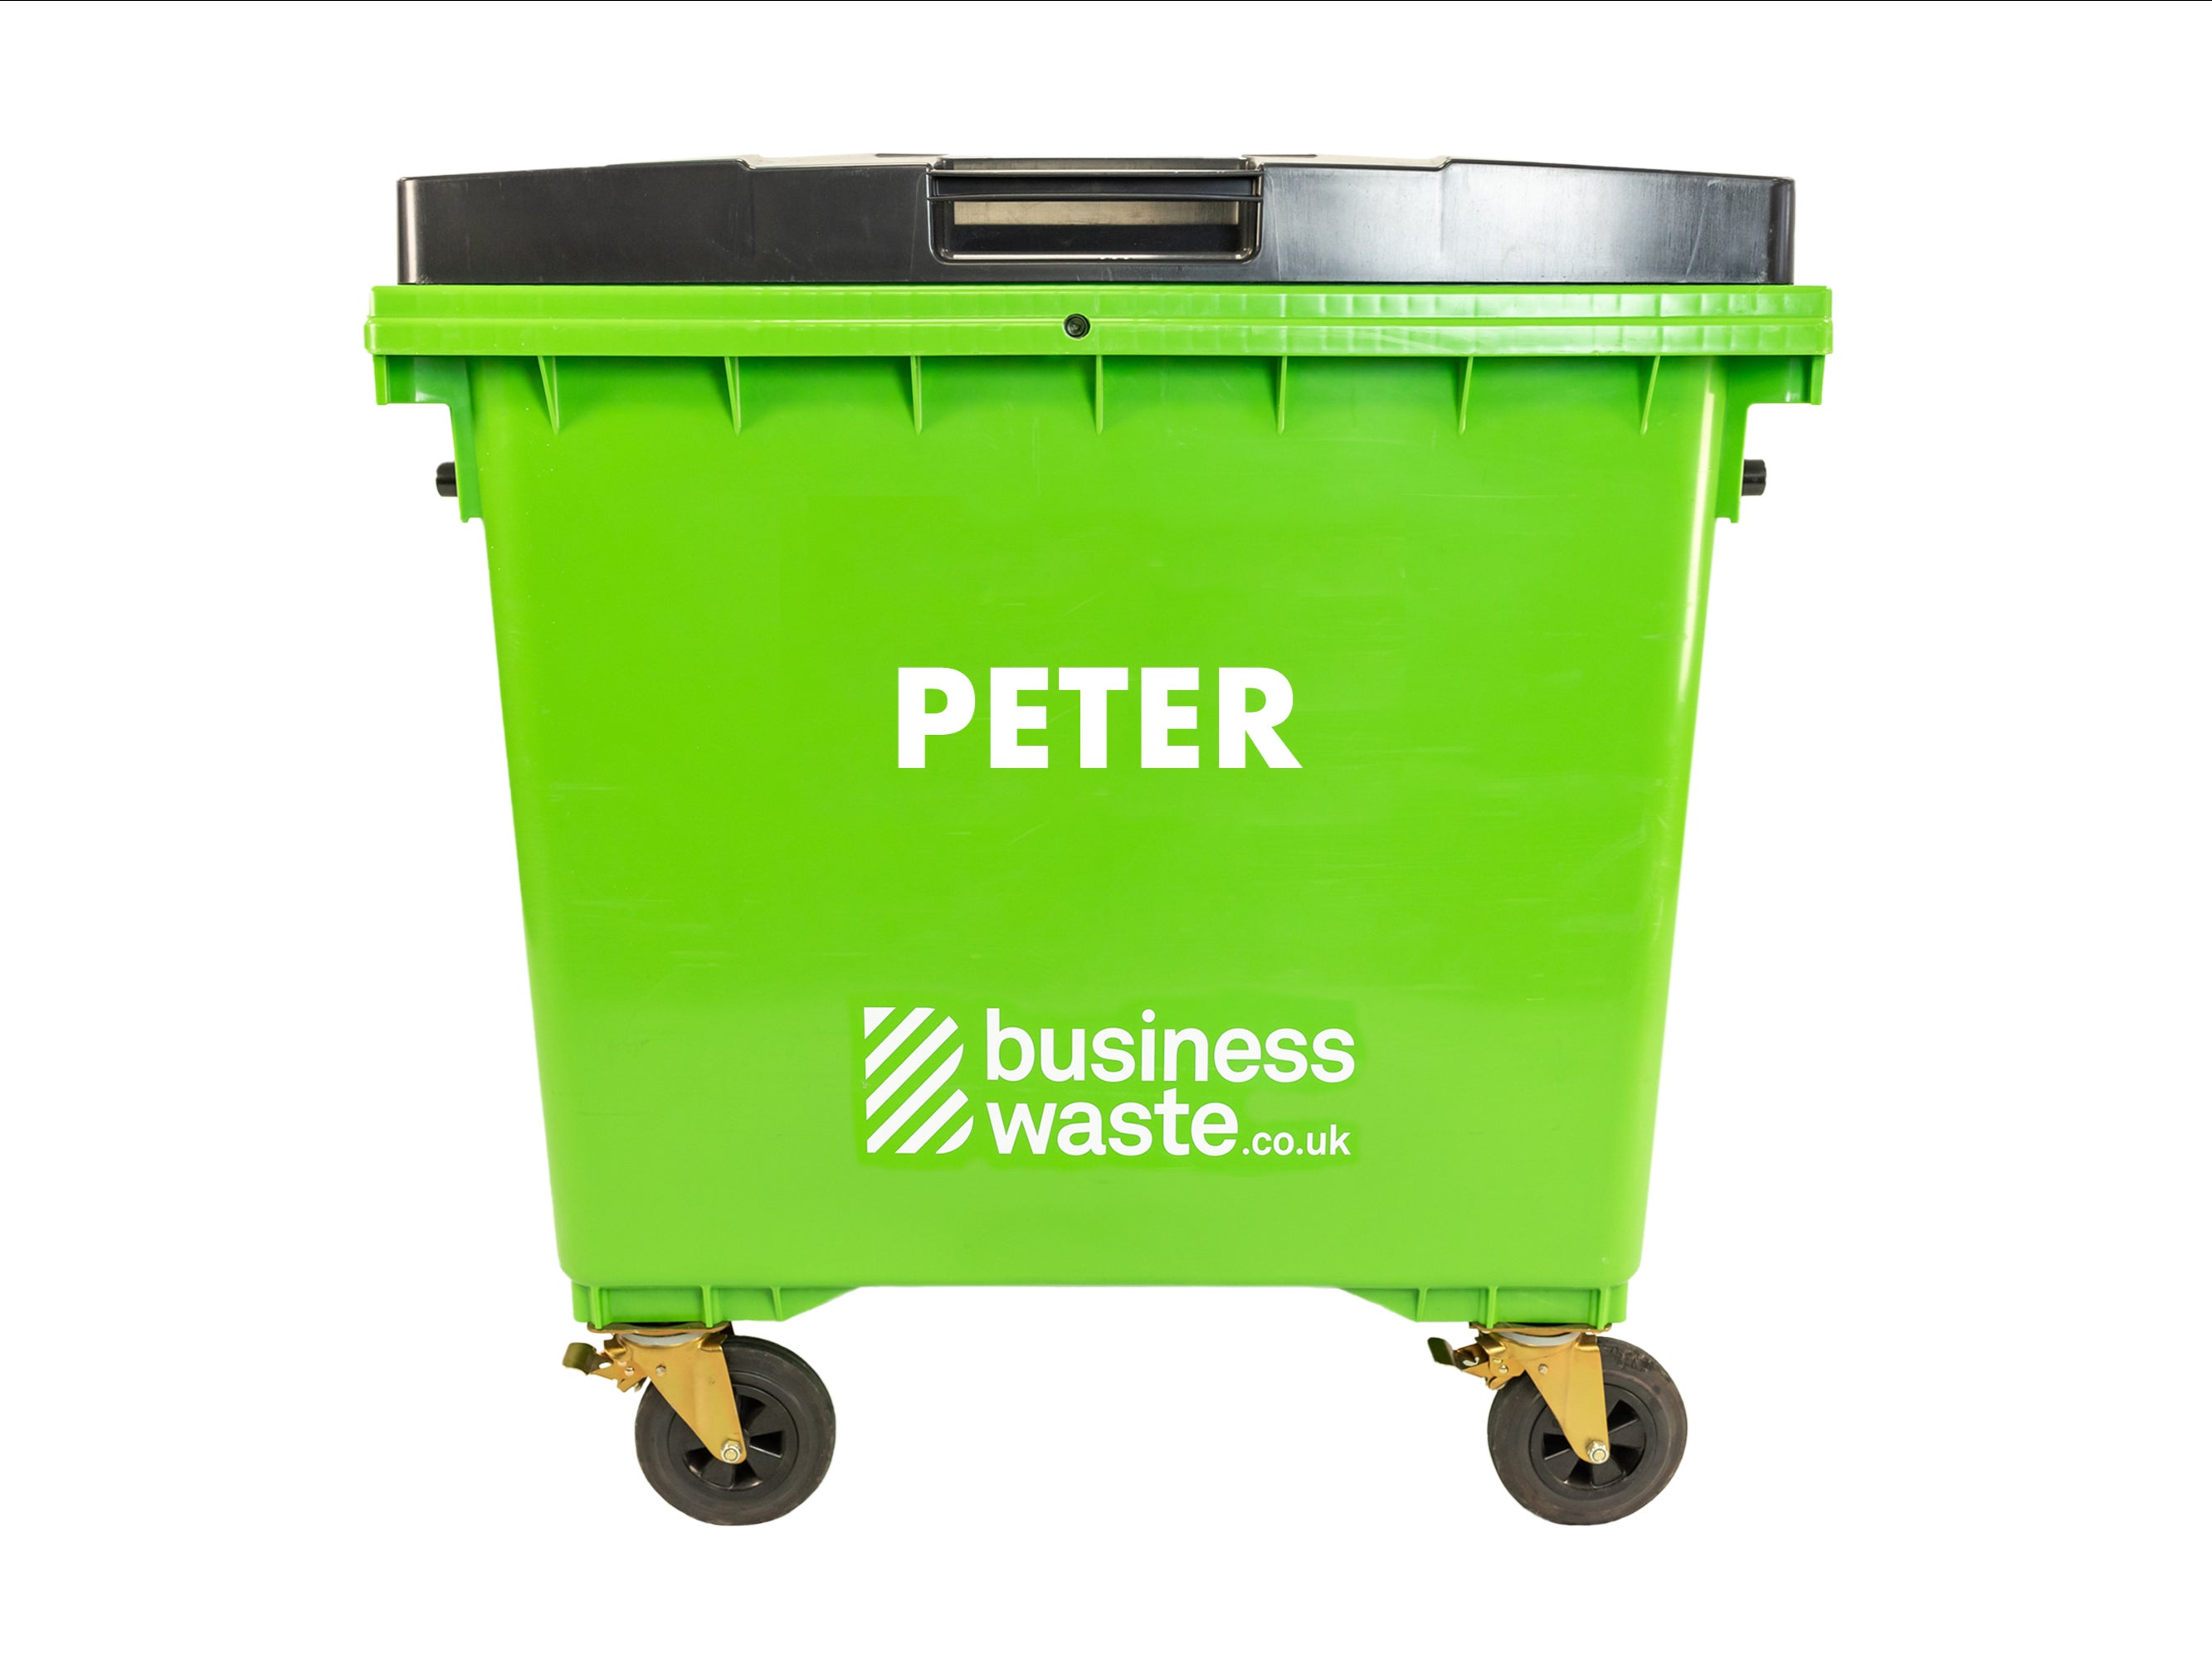 BusinessWaste.co.uk is inviting people to name a bin after their ex for Valentine’s Day